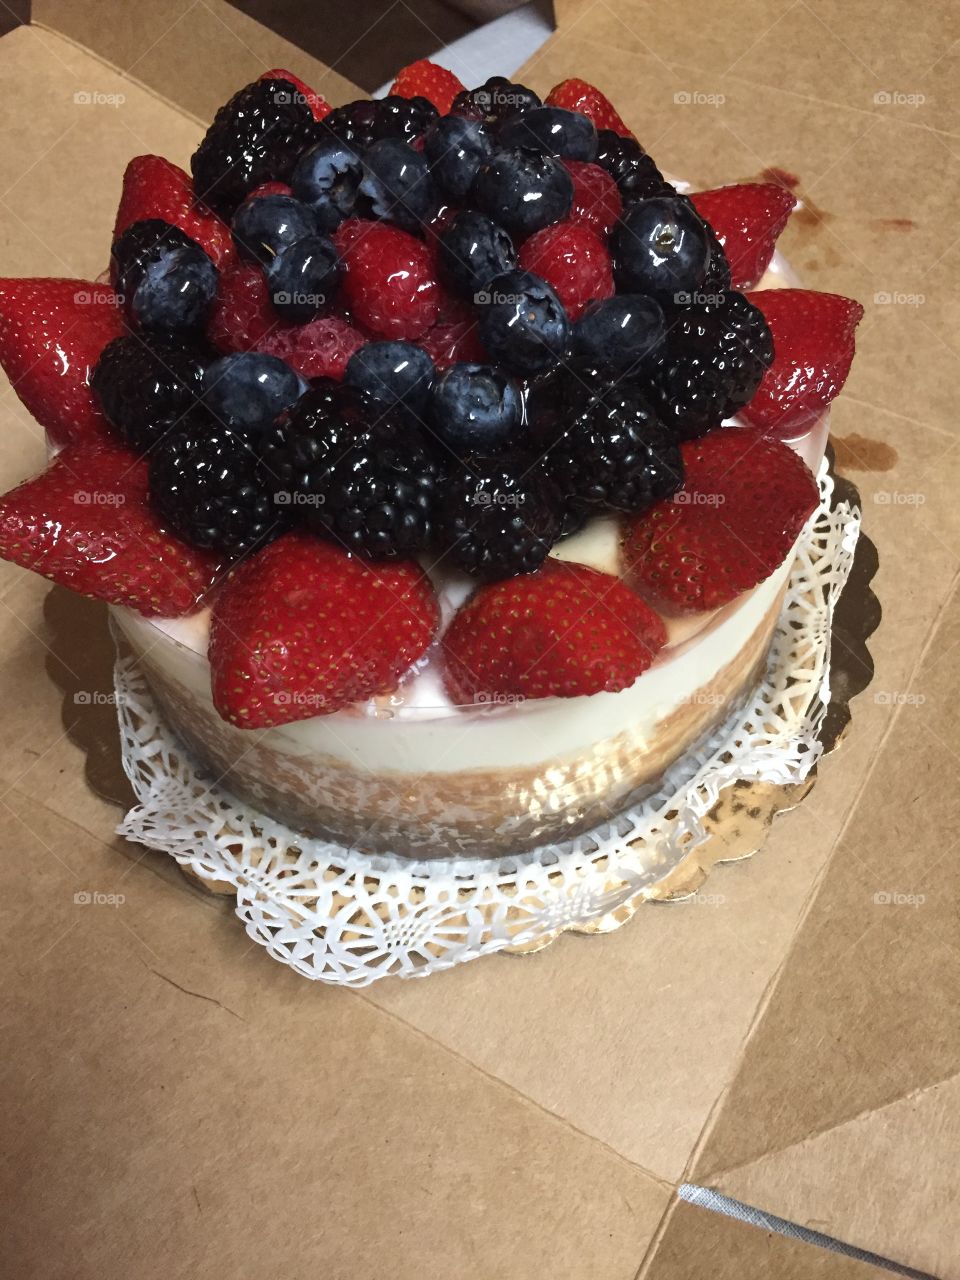 Cheesecake with Berries On Too from Whole Foods